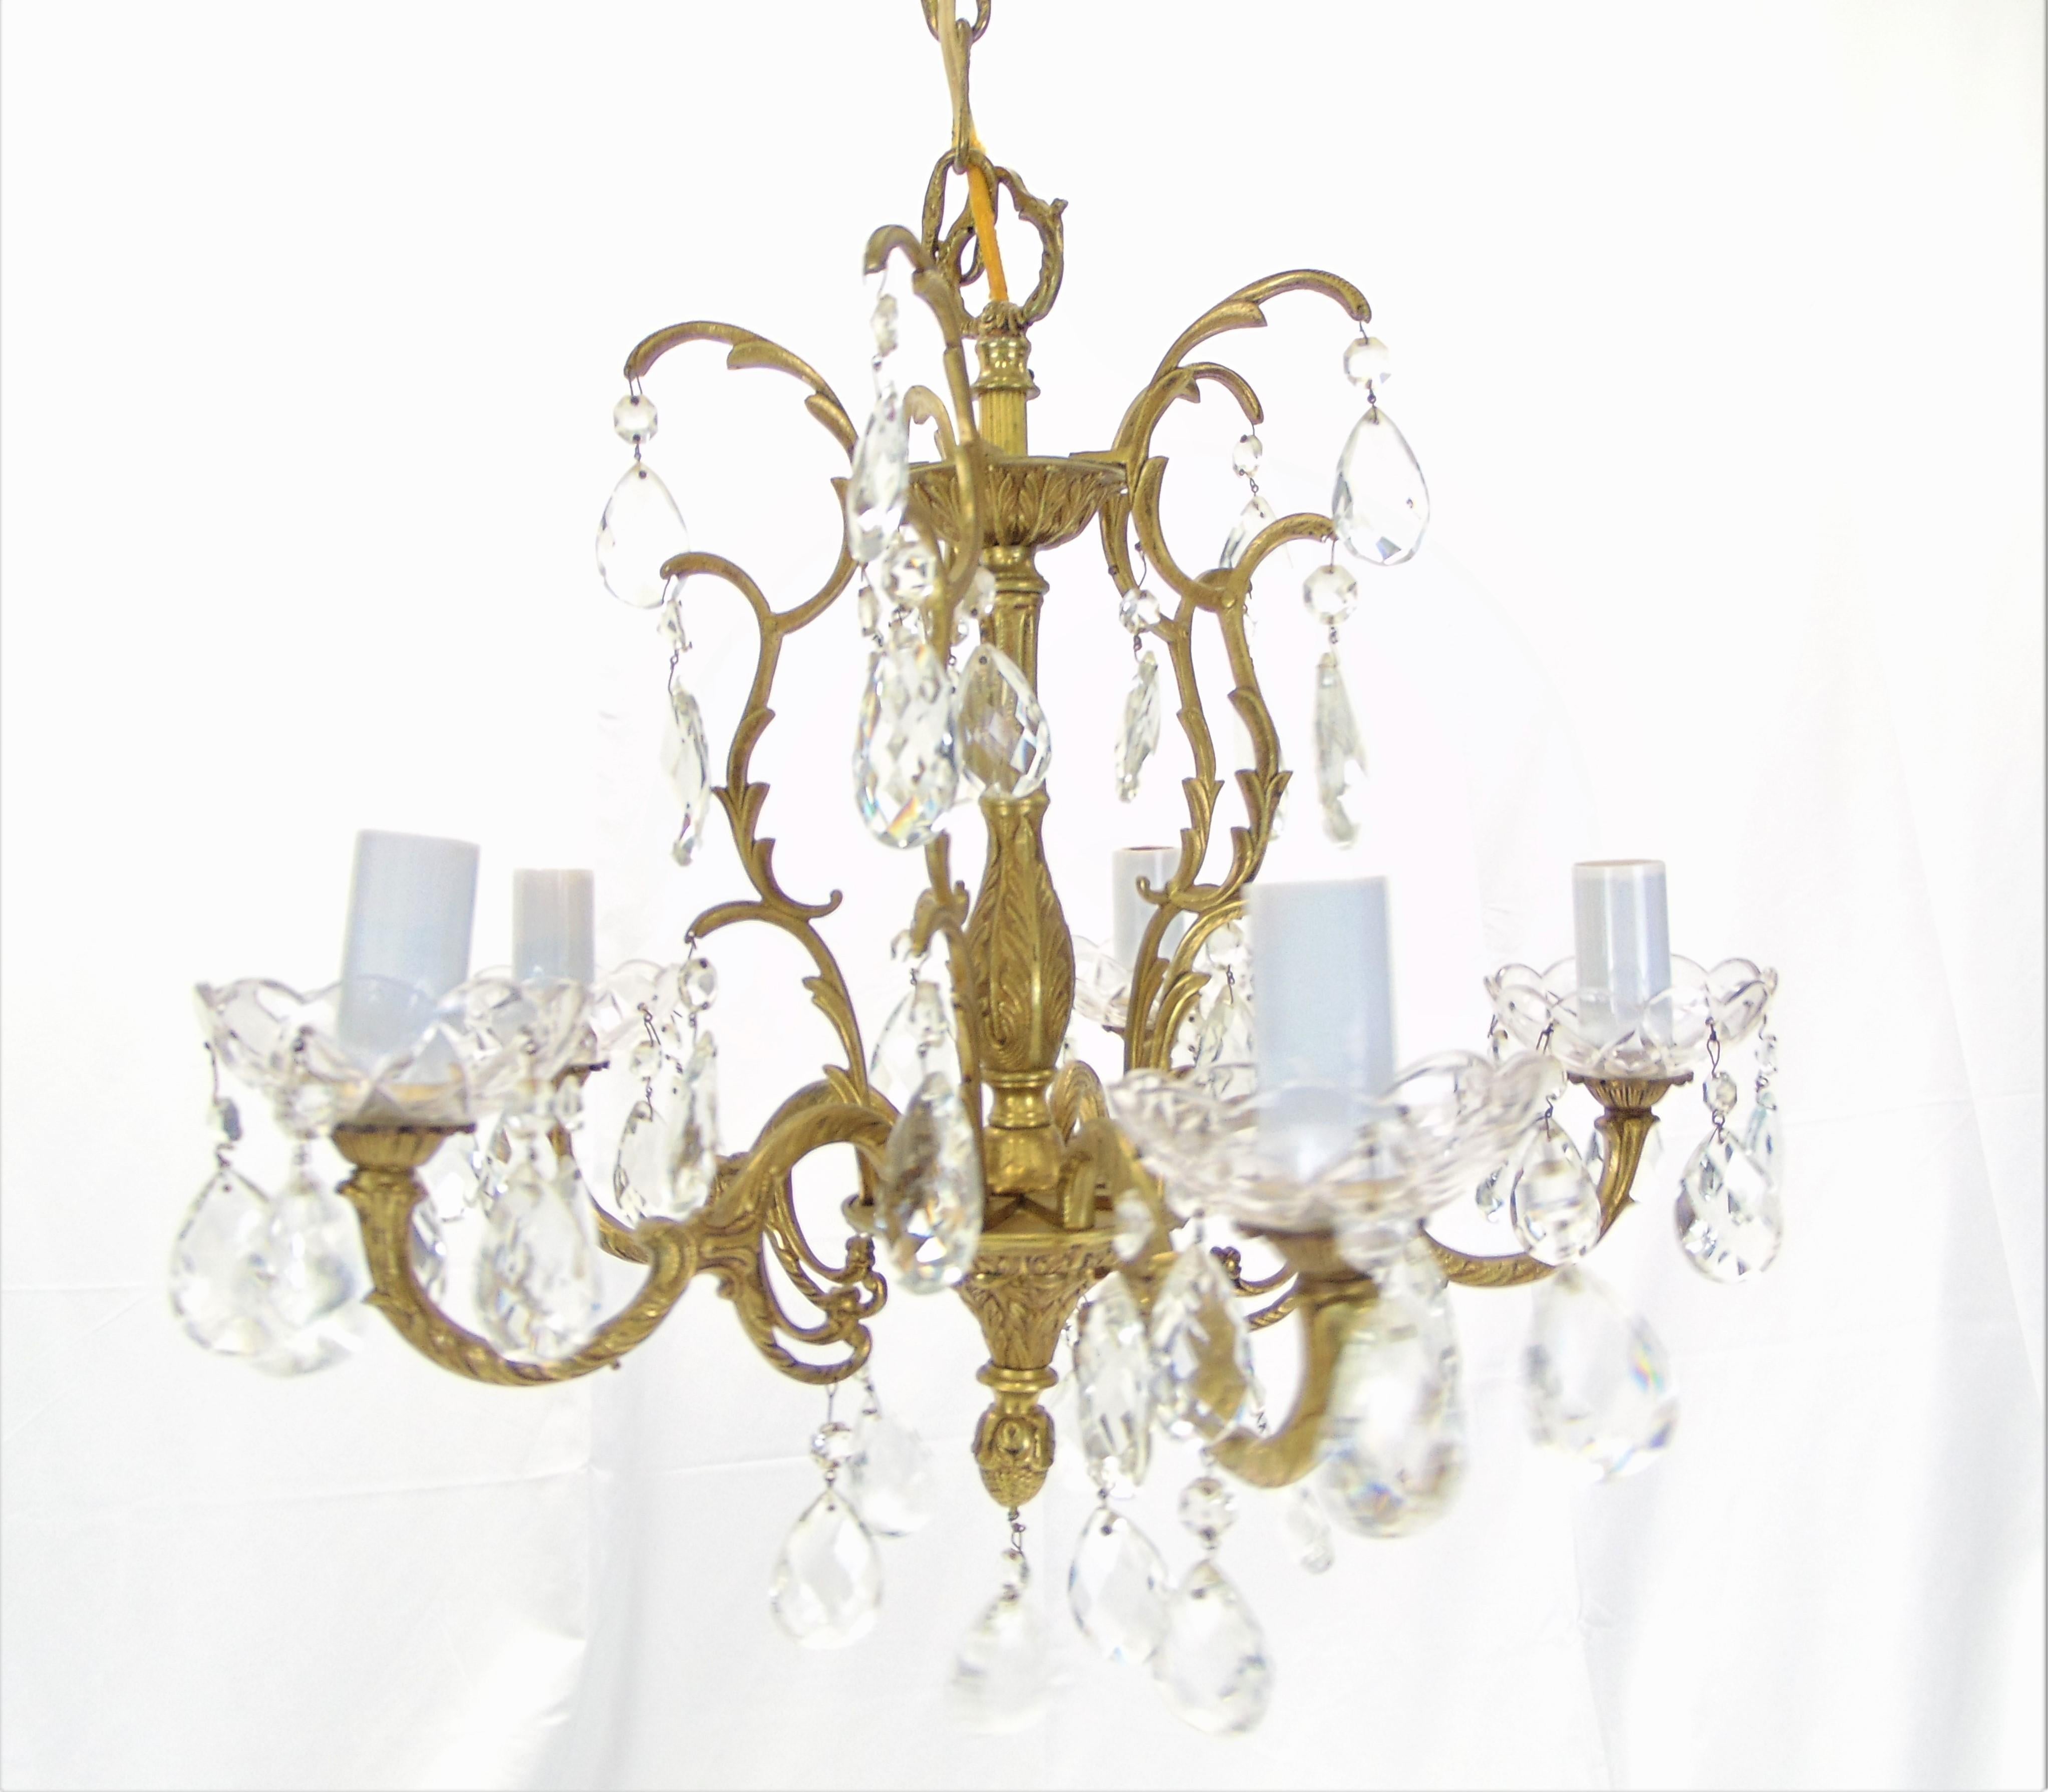 This is a beautiful vintage brass and crystal chandelier made in Spain. It holds 5 lights. This chandelier holds a larger sized light bulb than most chandeliers.
Measures: 21'' D x 21'' W x 17.5'' H.